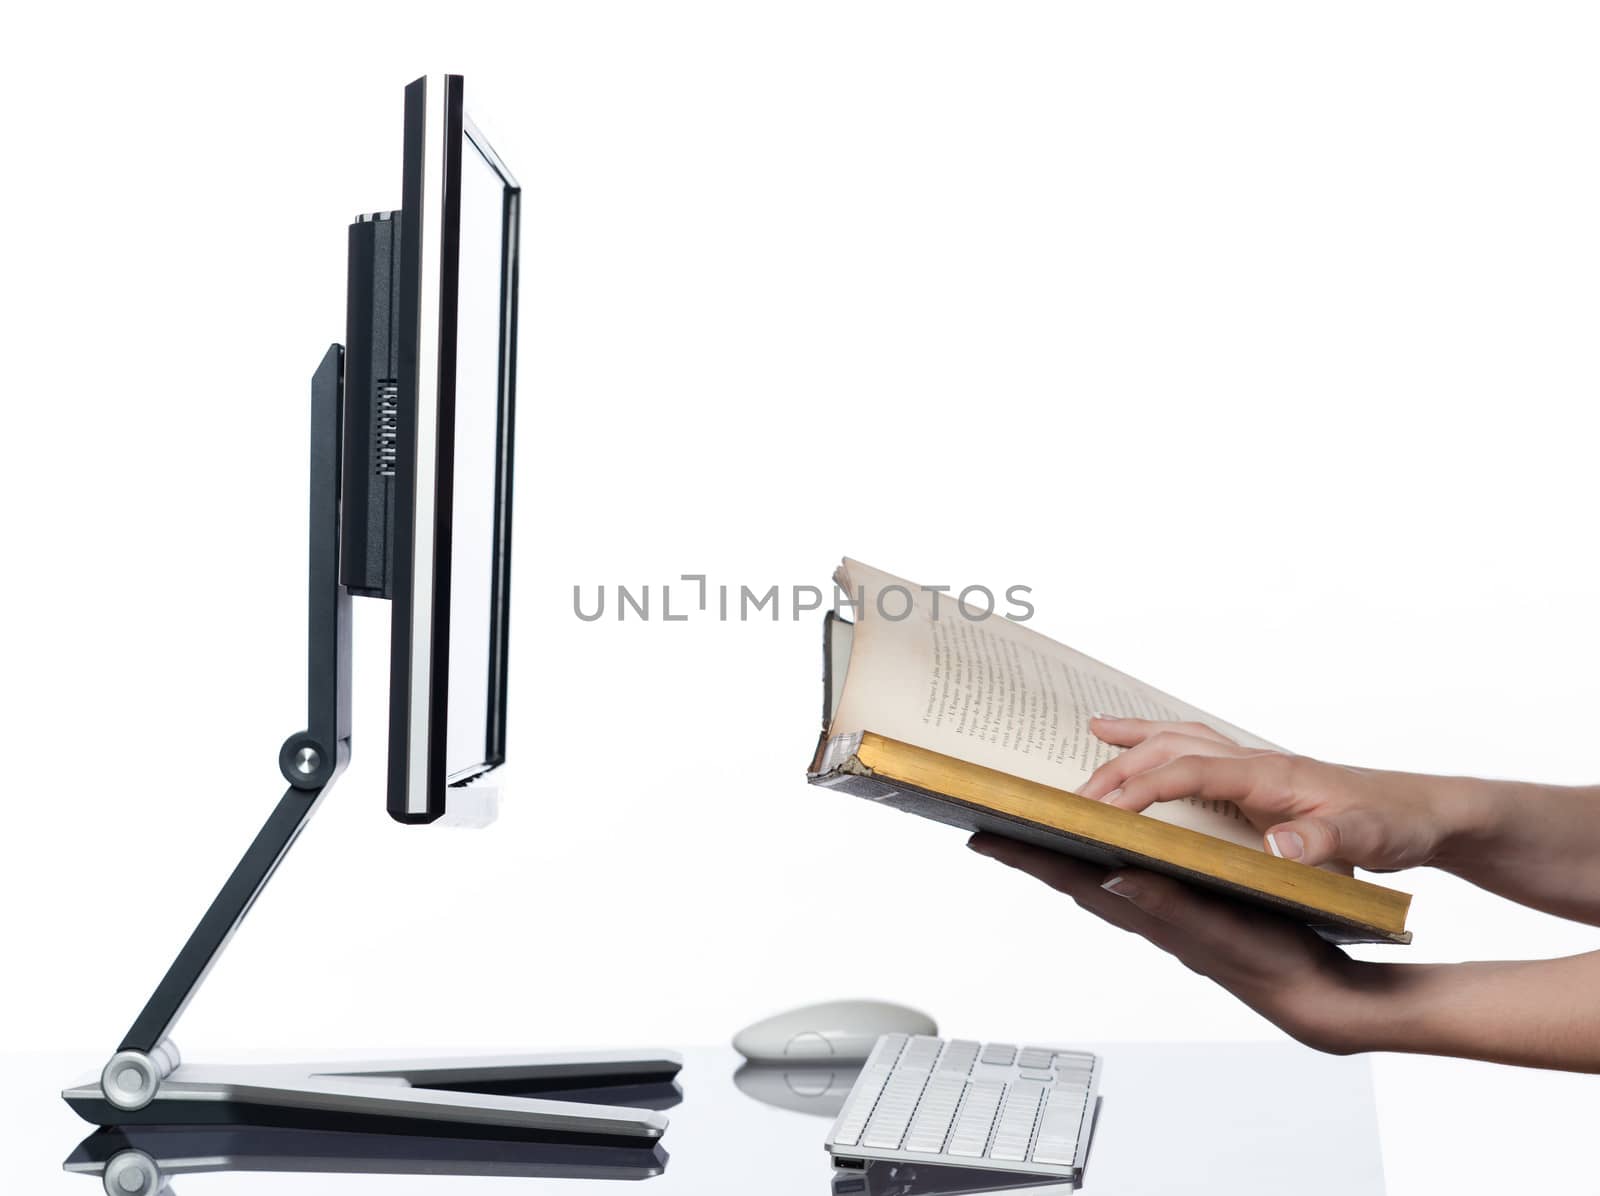 communication between human hand and a computer display monitor on isolated white background expressing book reading concept